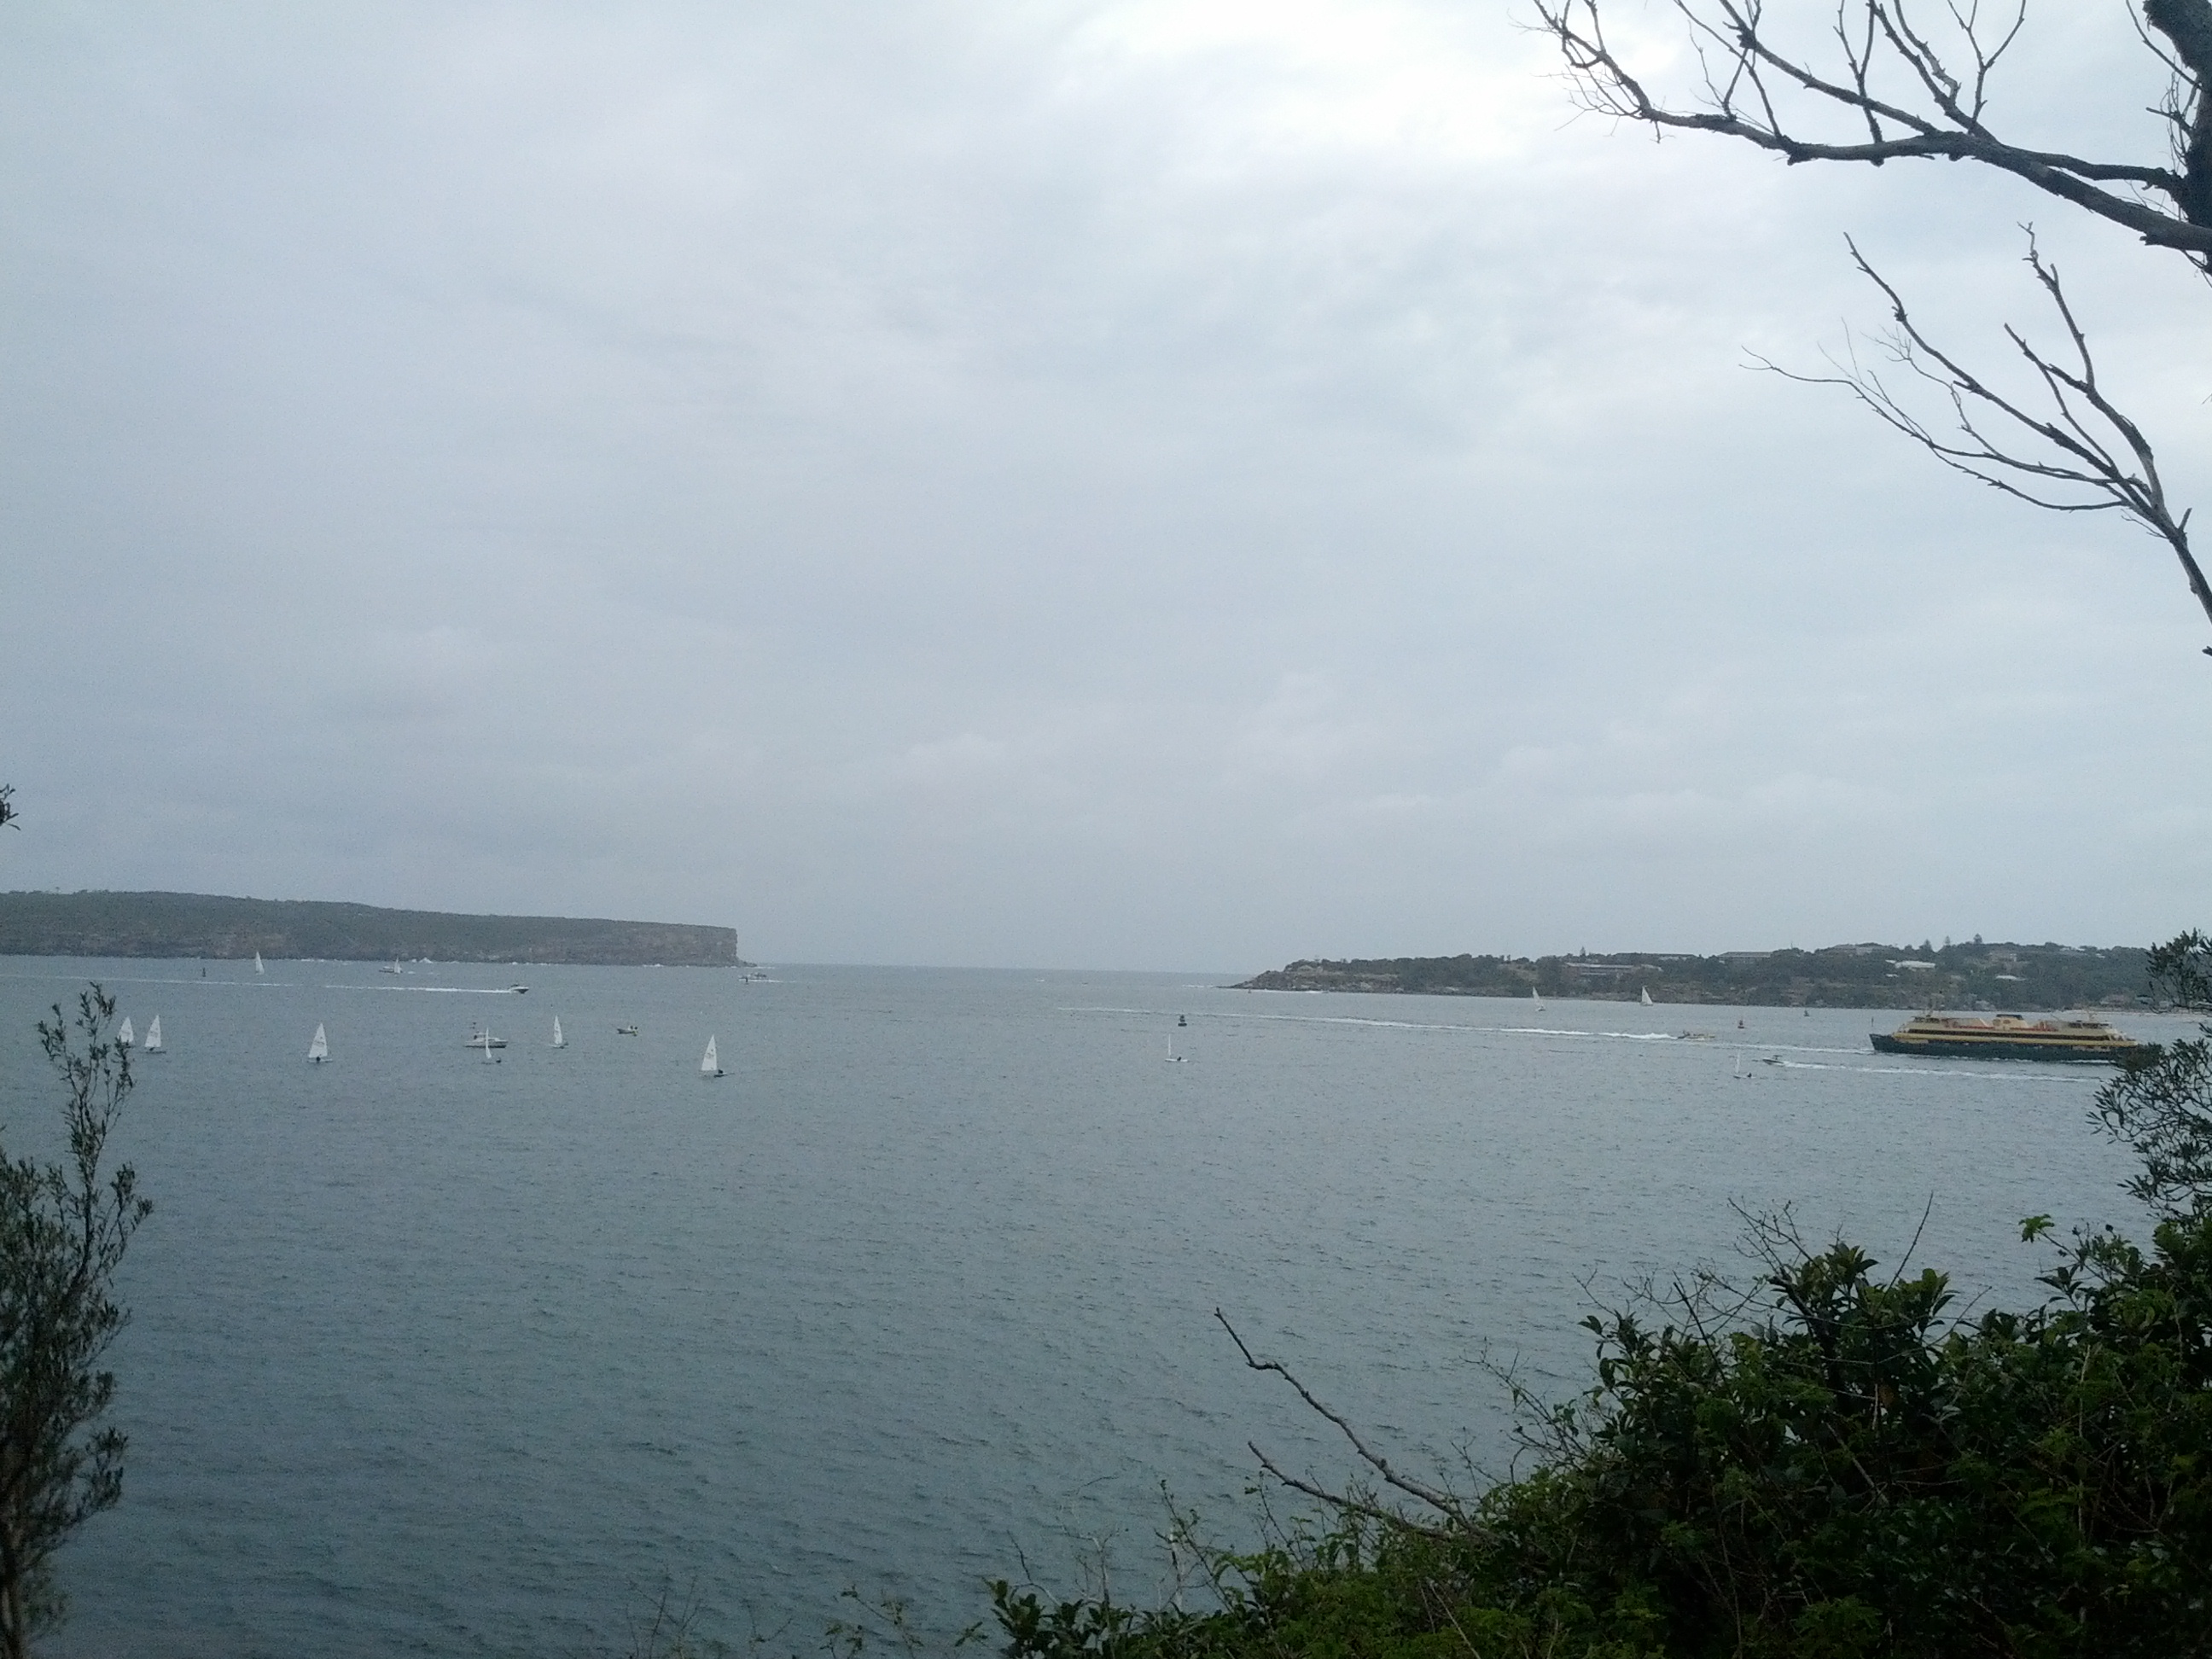 View out from Middle Head towards Sydney Heads, the entrance to Sydney Harbour.